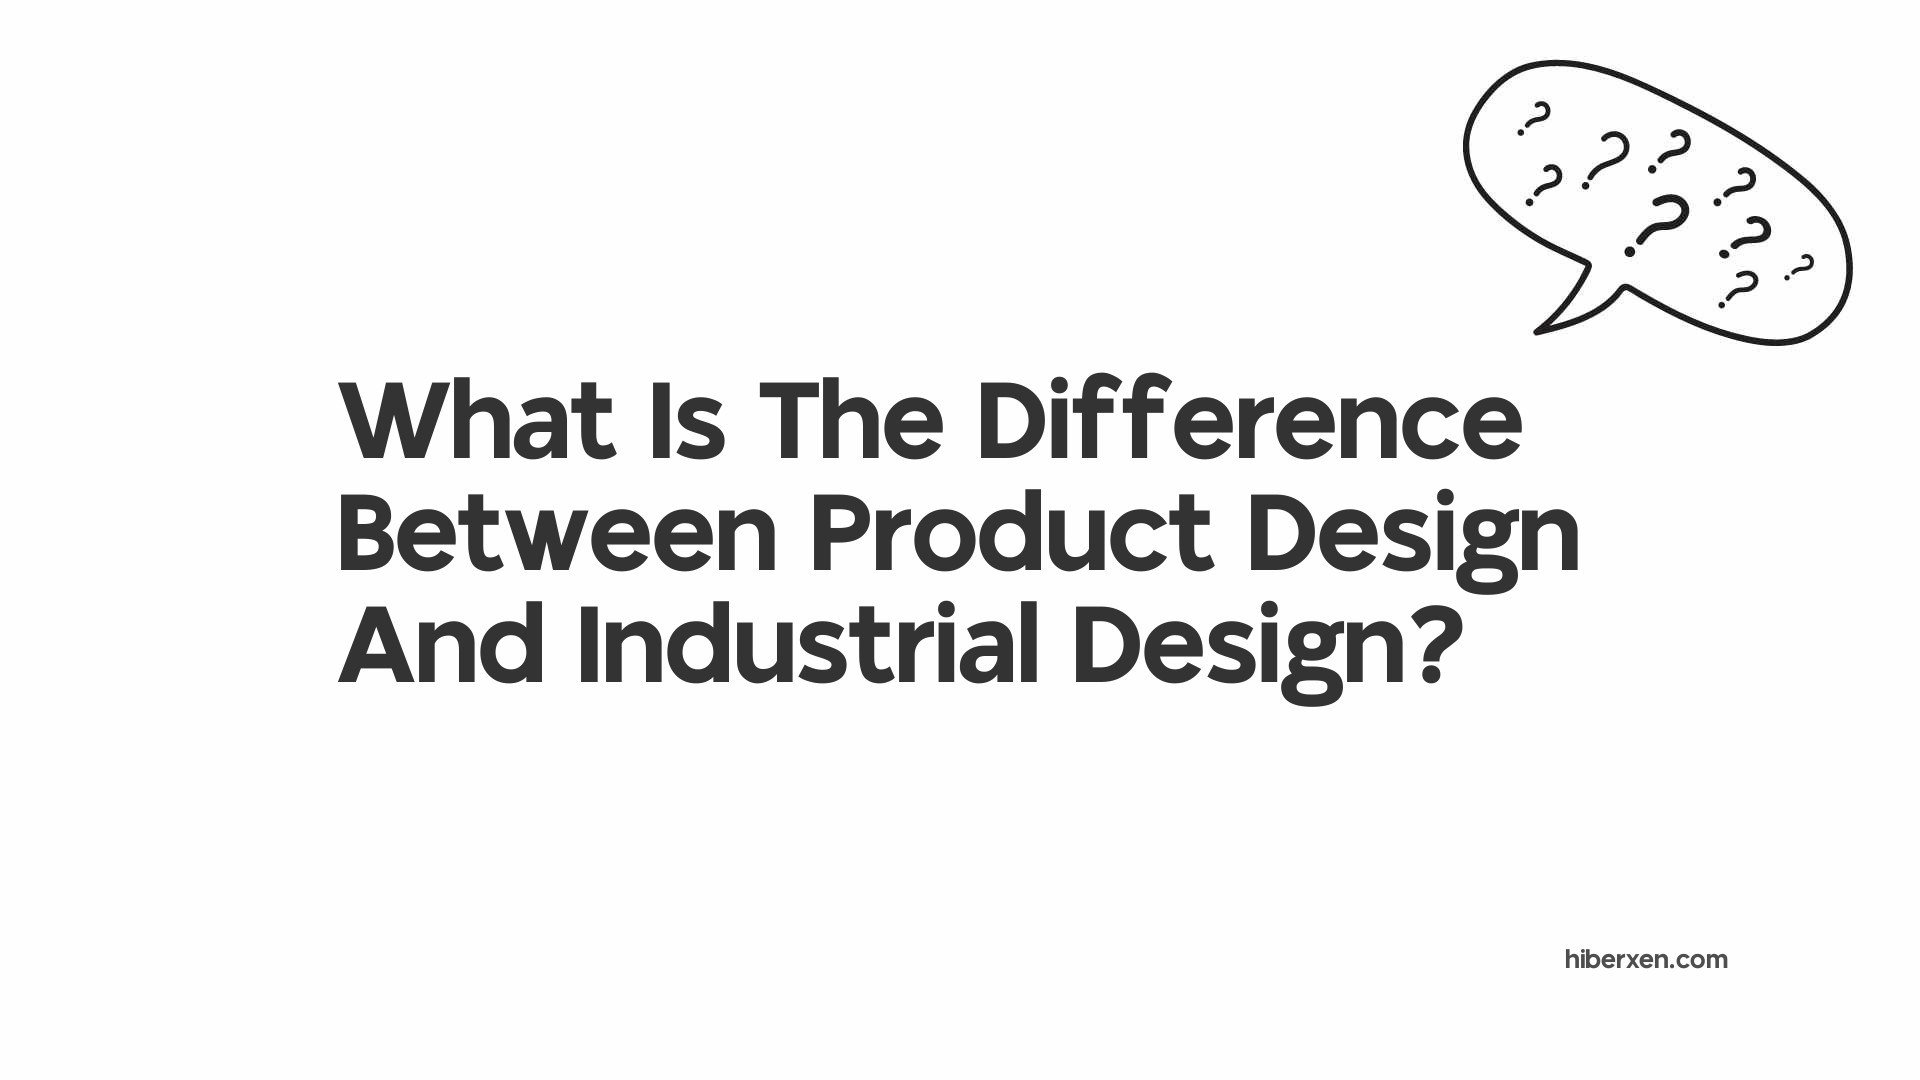 What Is The Difference Between Product Design And Industrial Design?